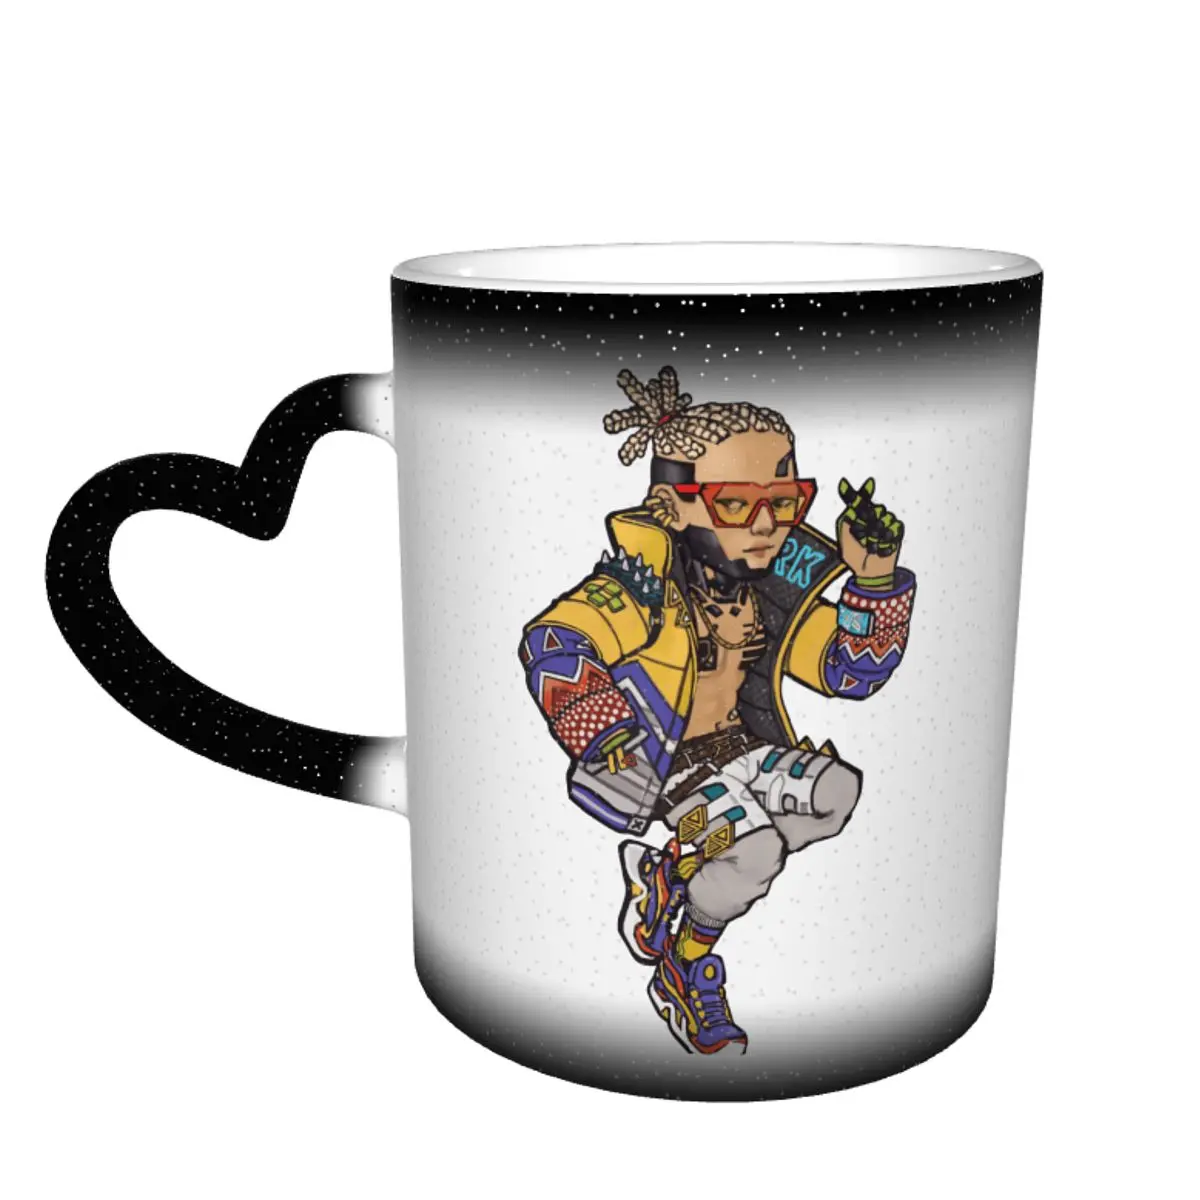 

Color Changing Mug in the Sky Hypebeast Crypto Apex Legends Graphic Btc Ceramic Heat-sensitive Cup Funny Sarcastic Milk cups